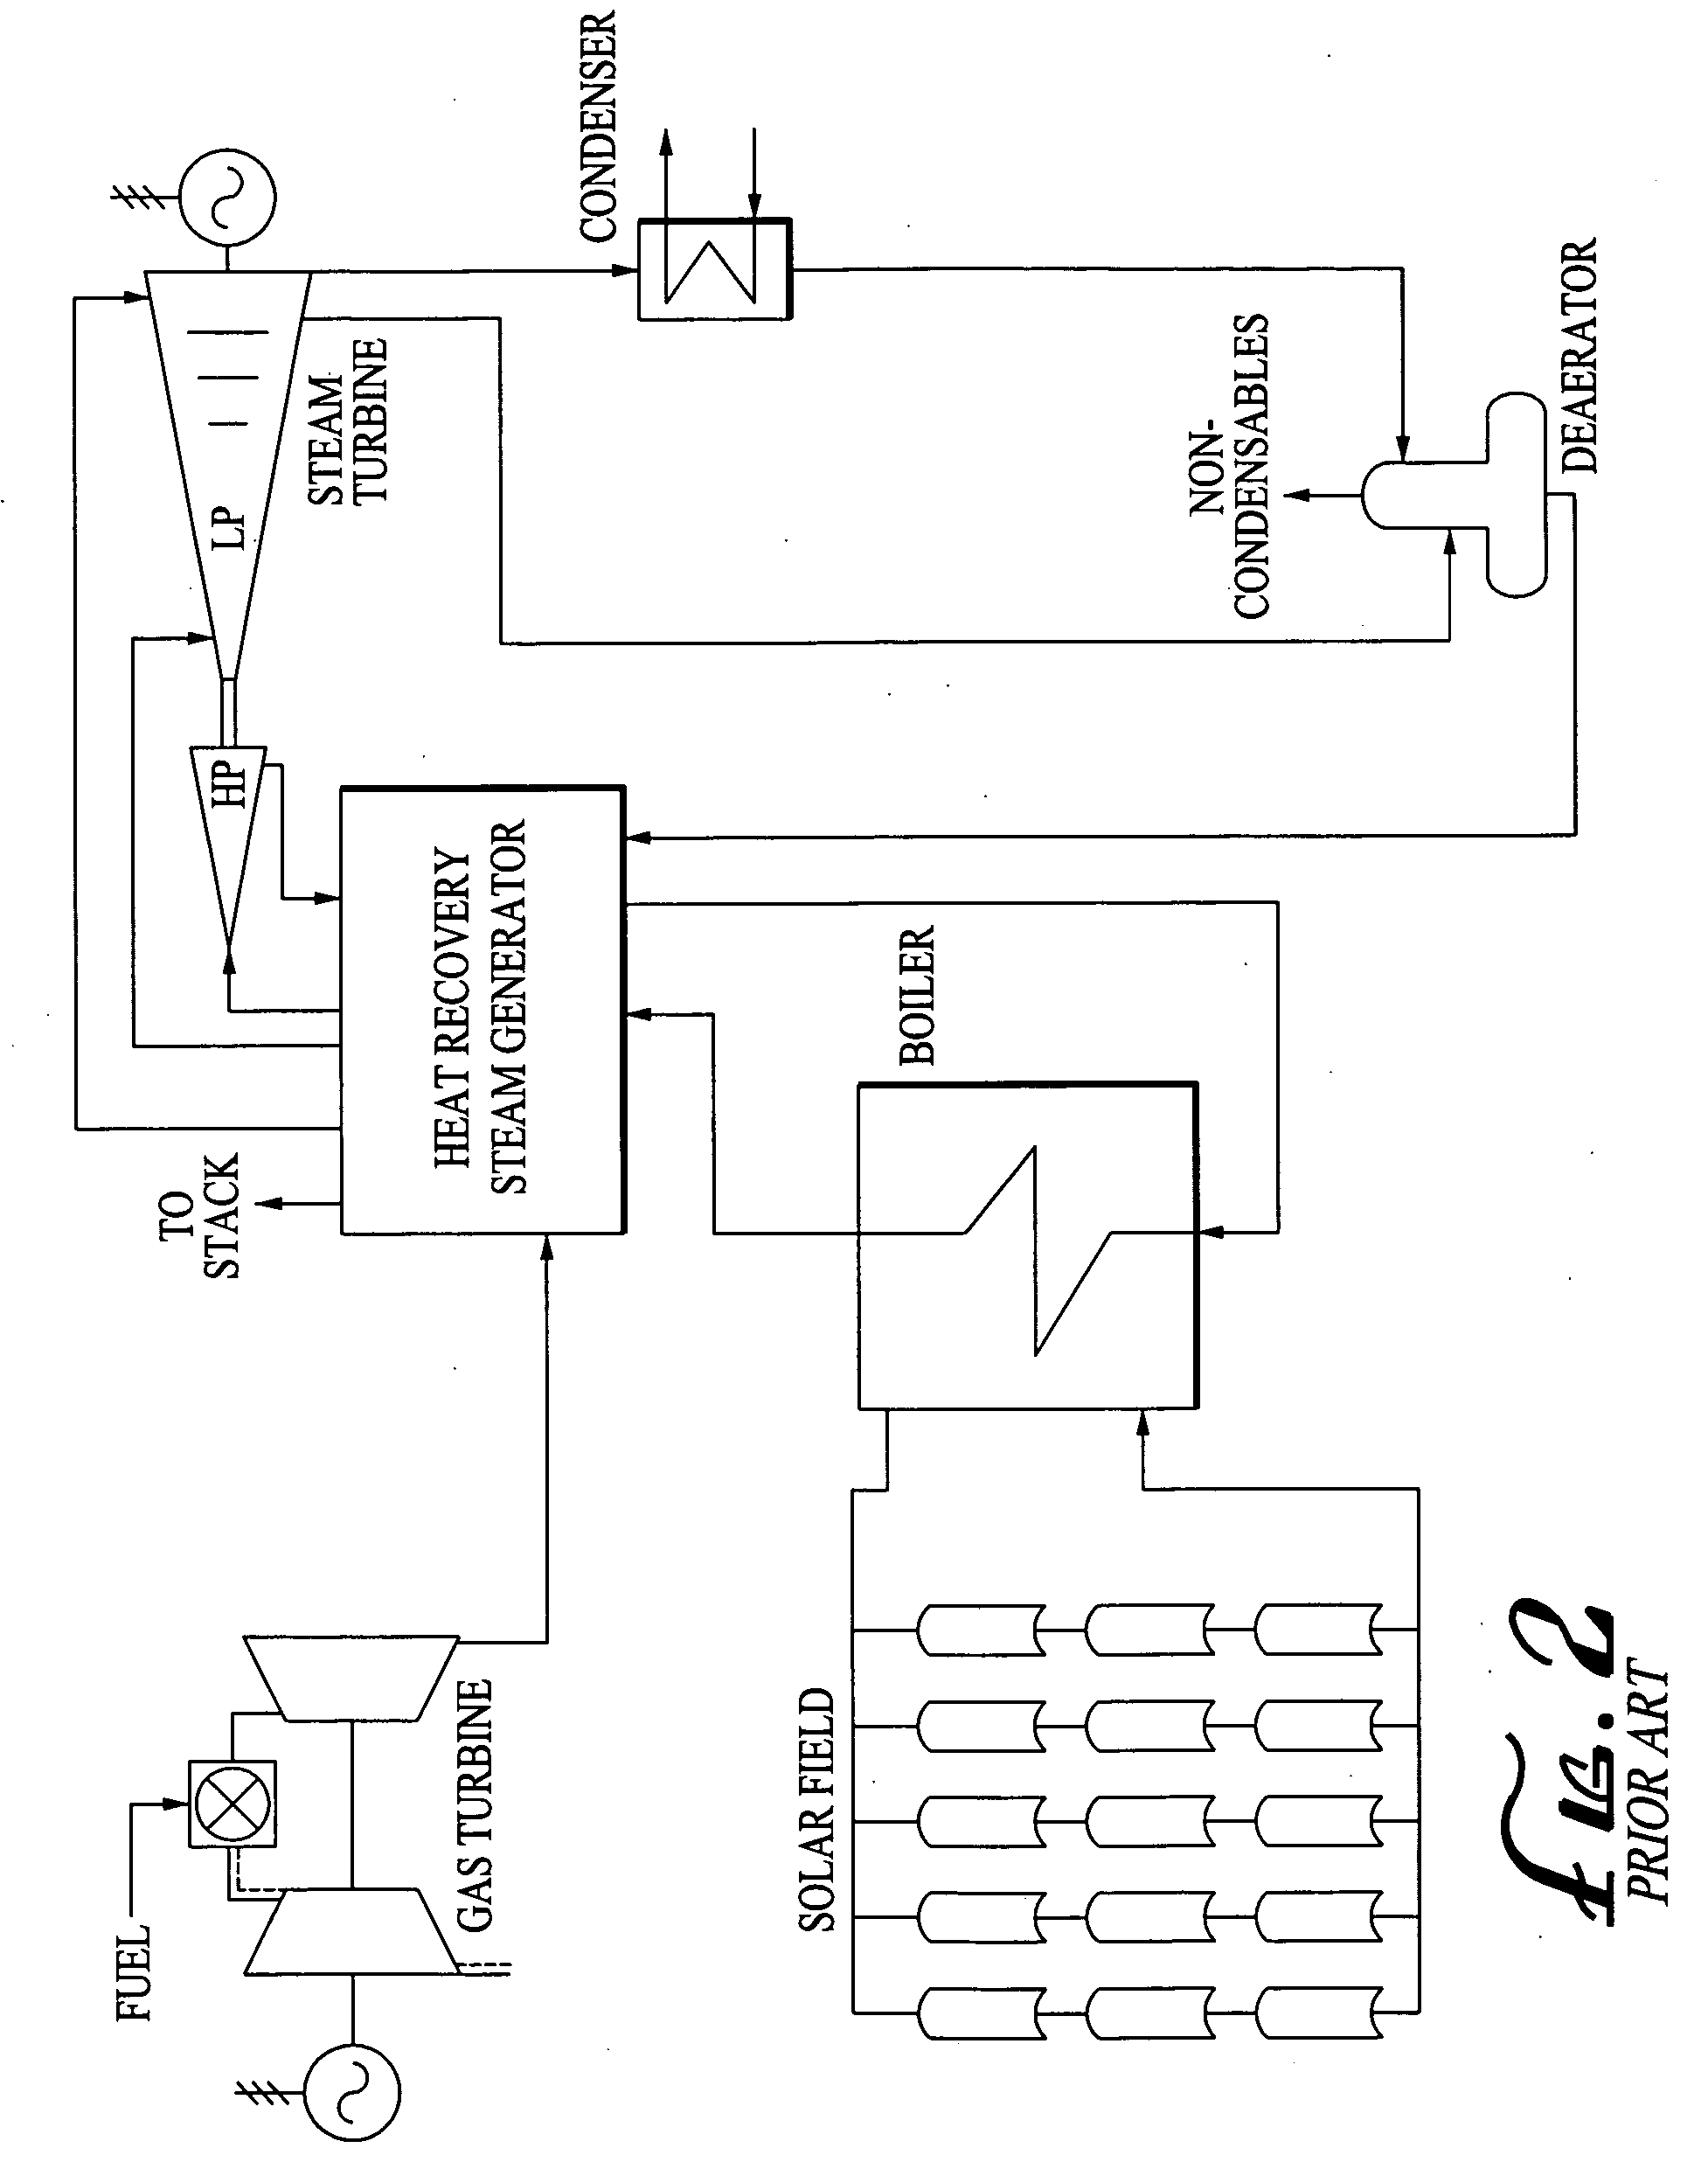 Electrical generating system using solar energy and gas turbine